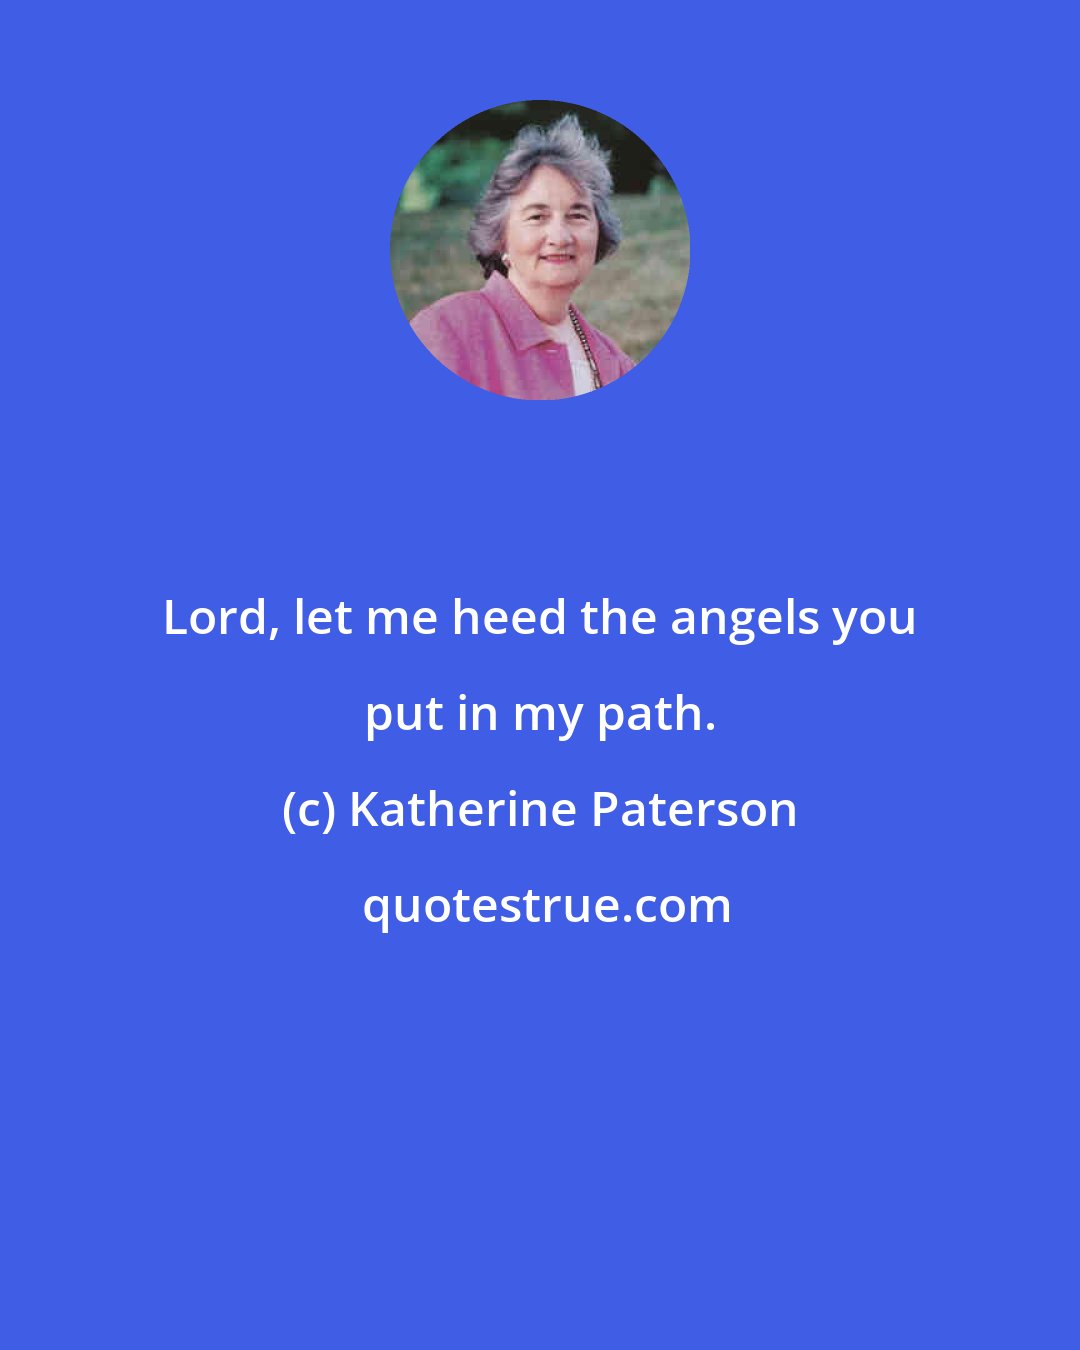 Katherine Paterson: Lord, let me heed the angels you put in my path.